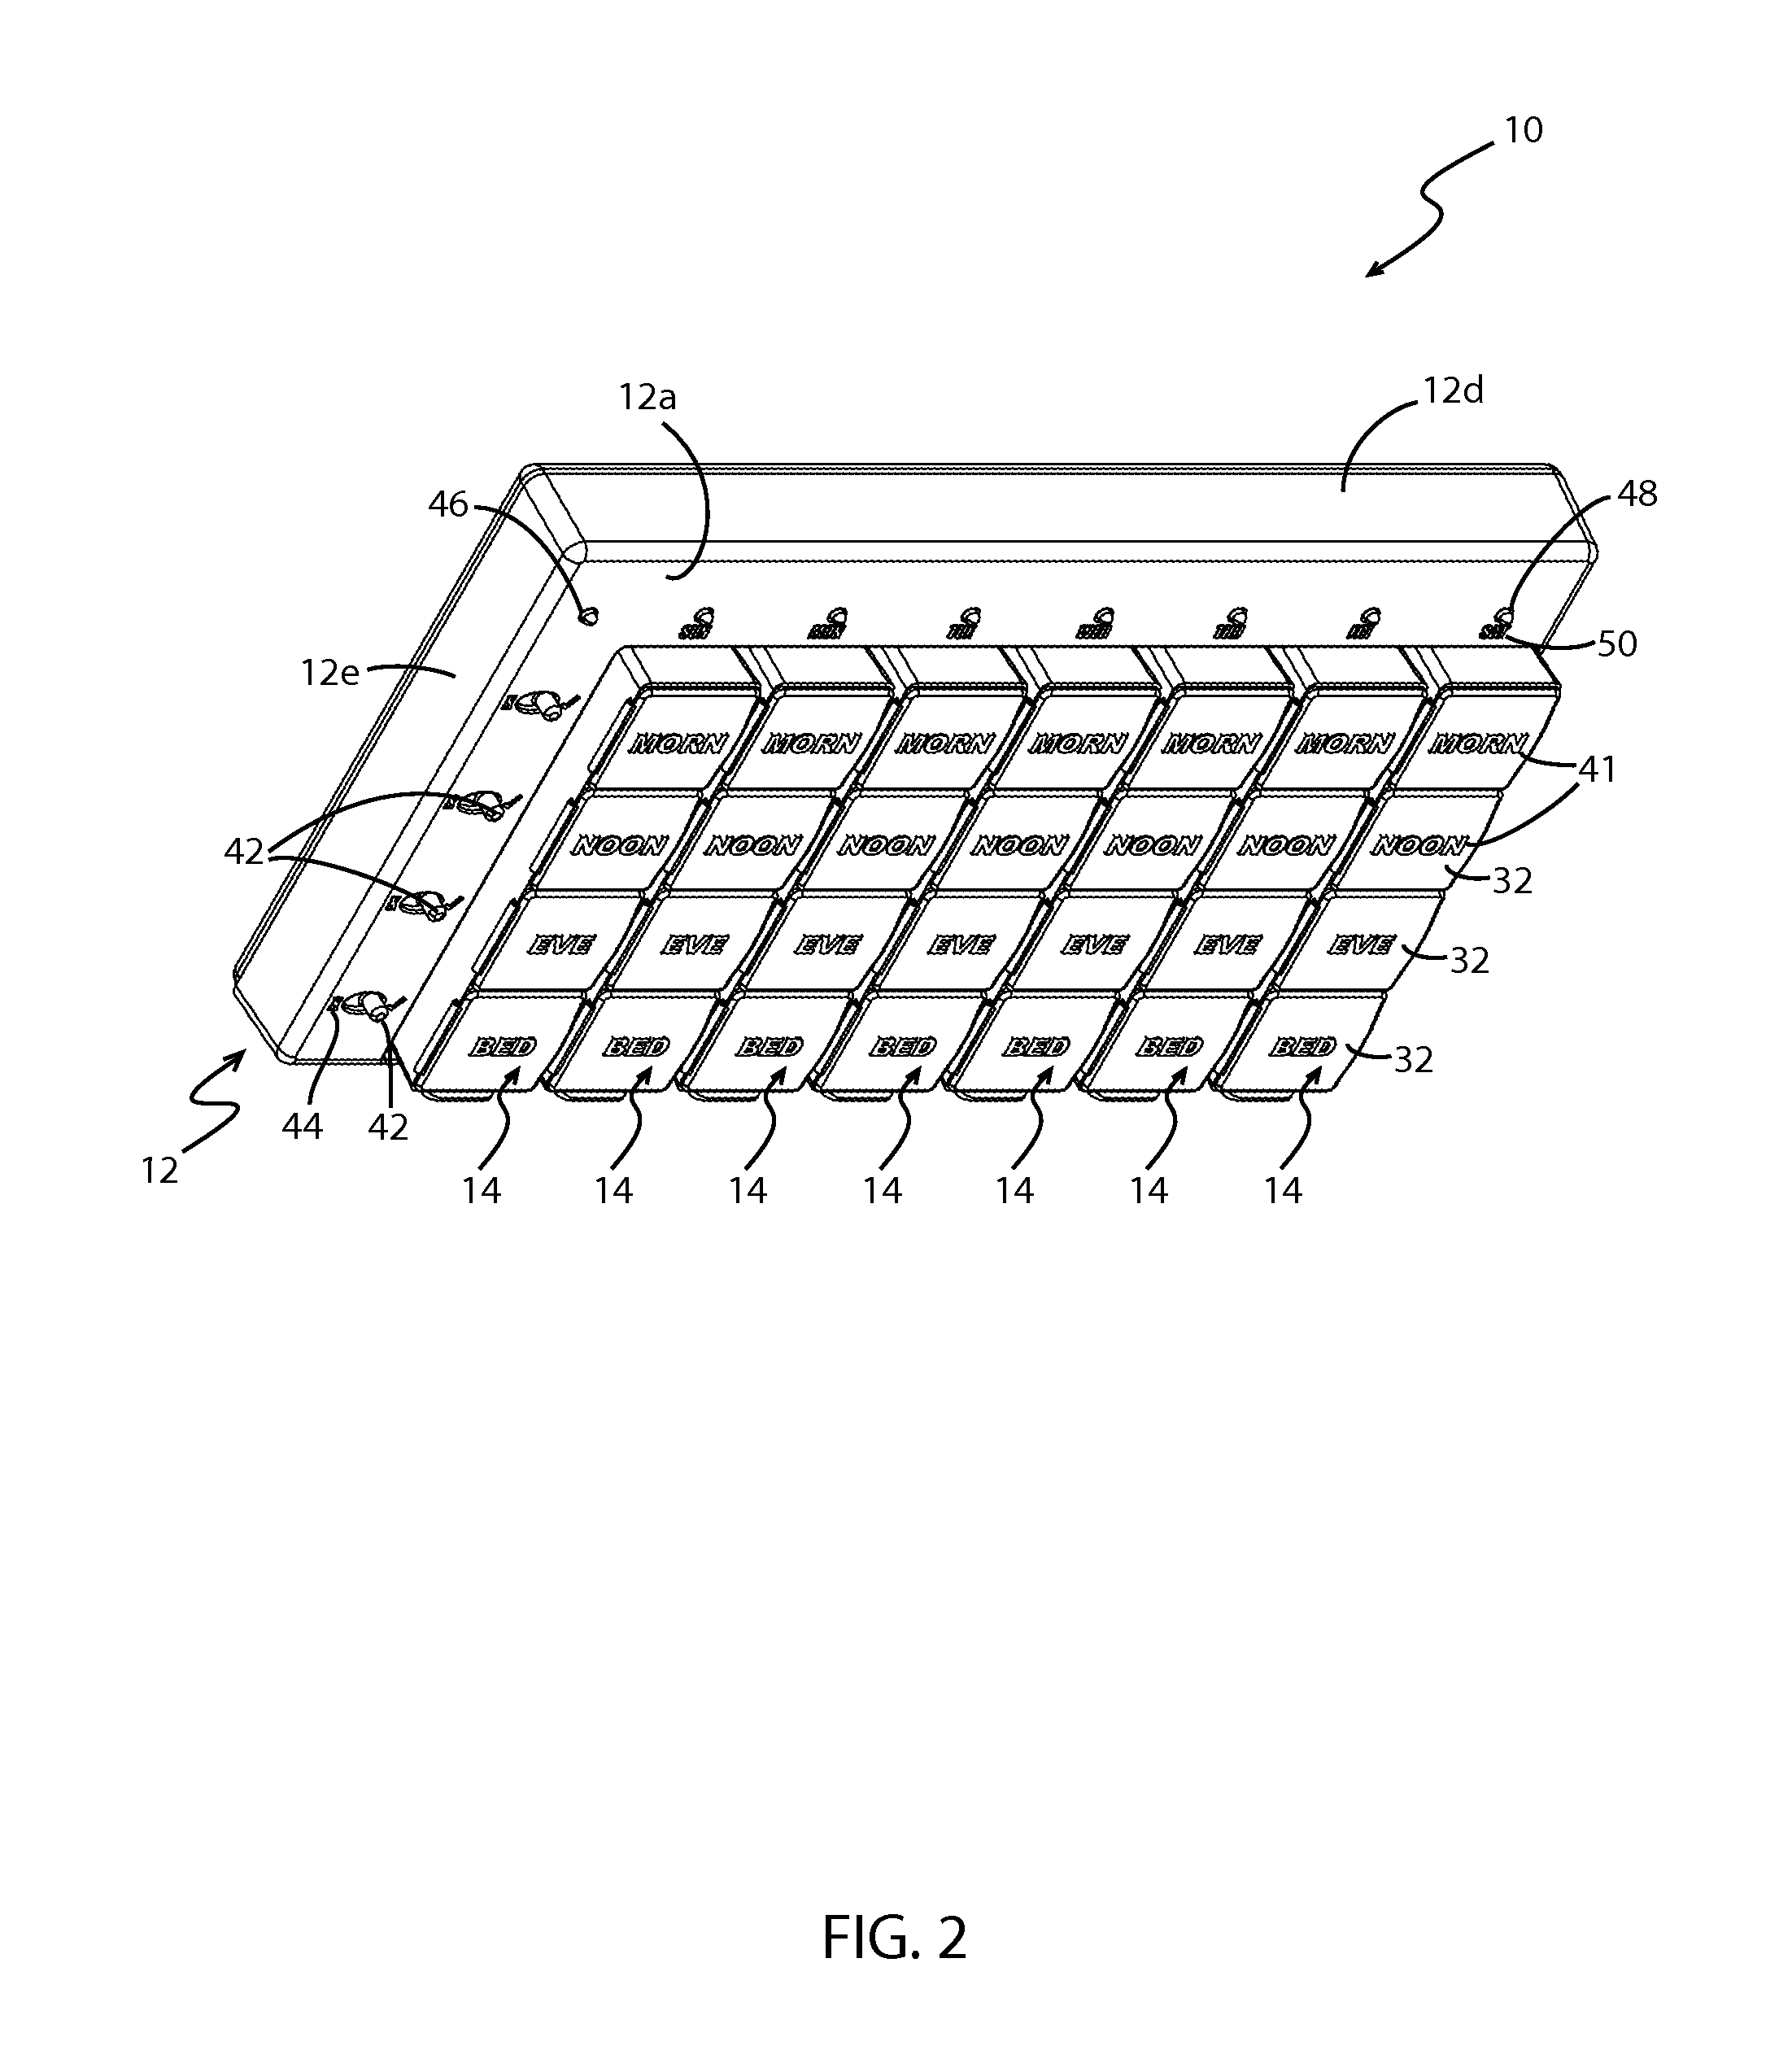 Method of using a medication reminder and compliance system including an electronic pill box